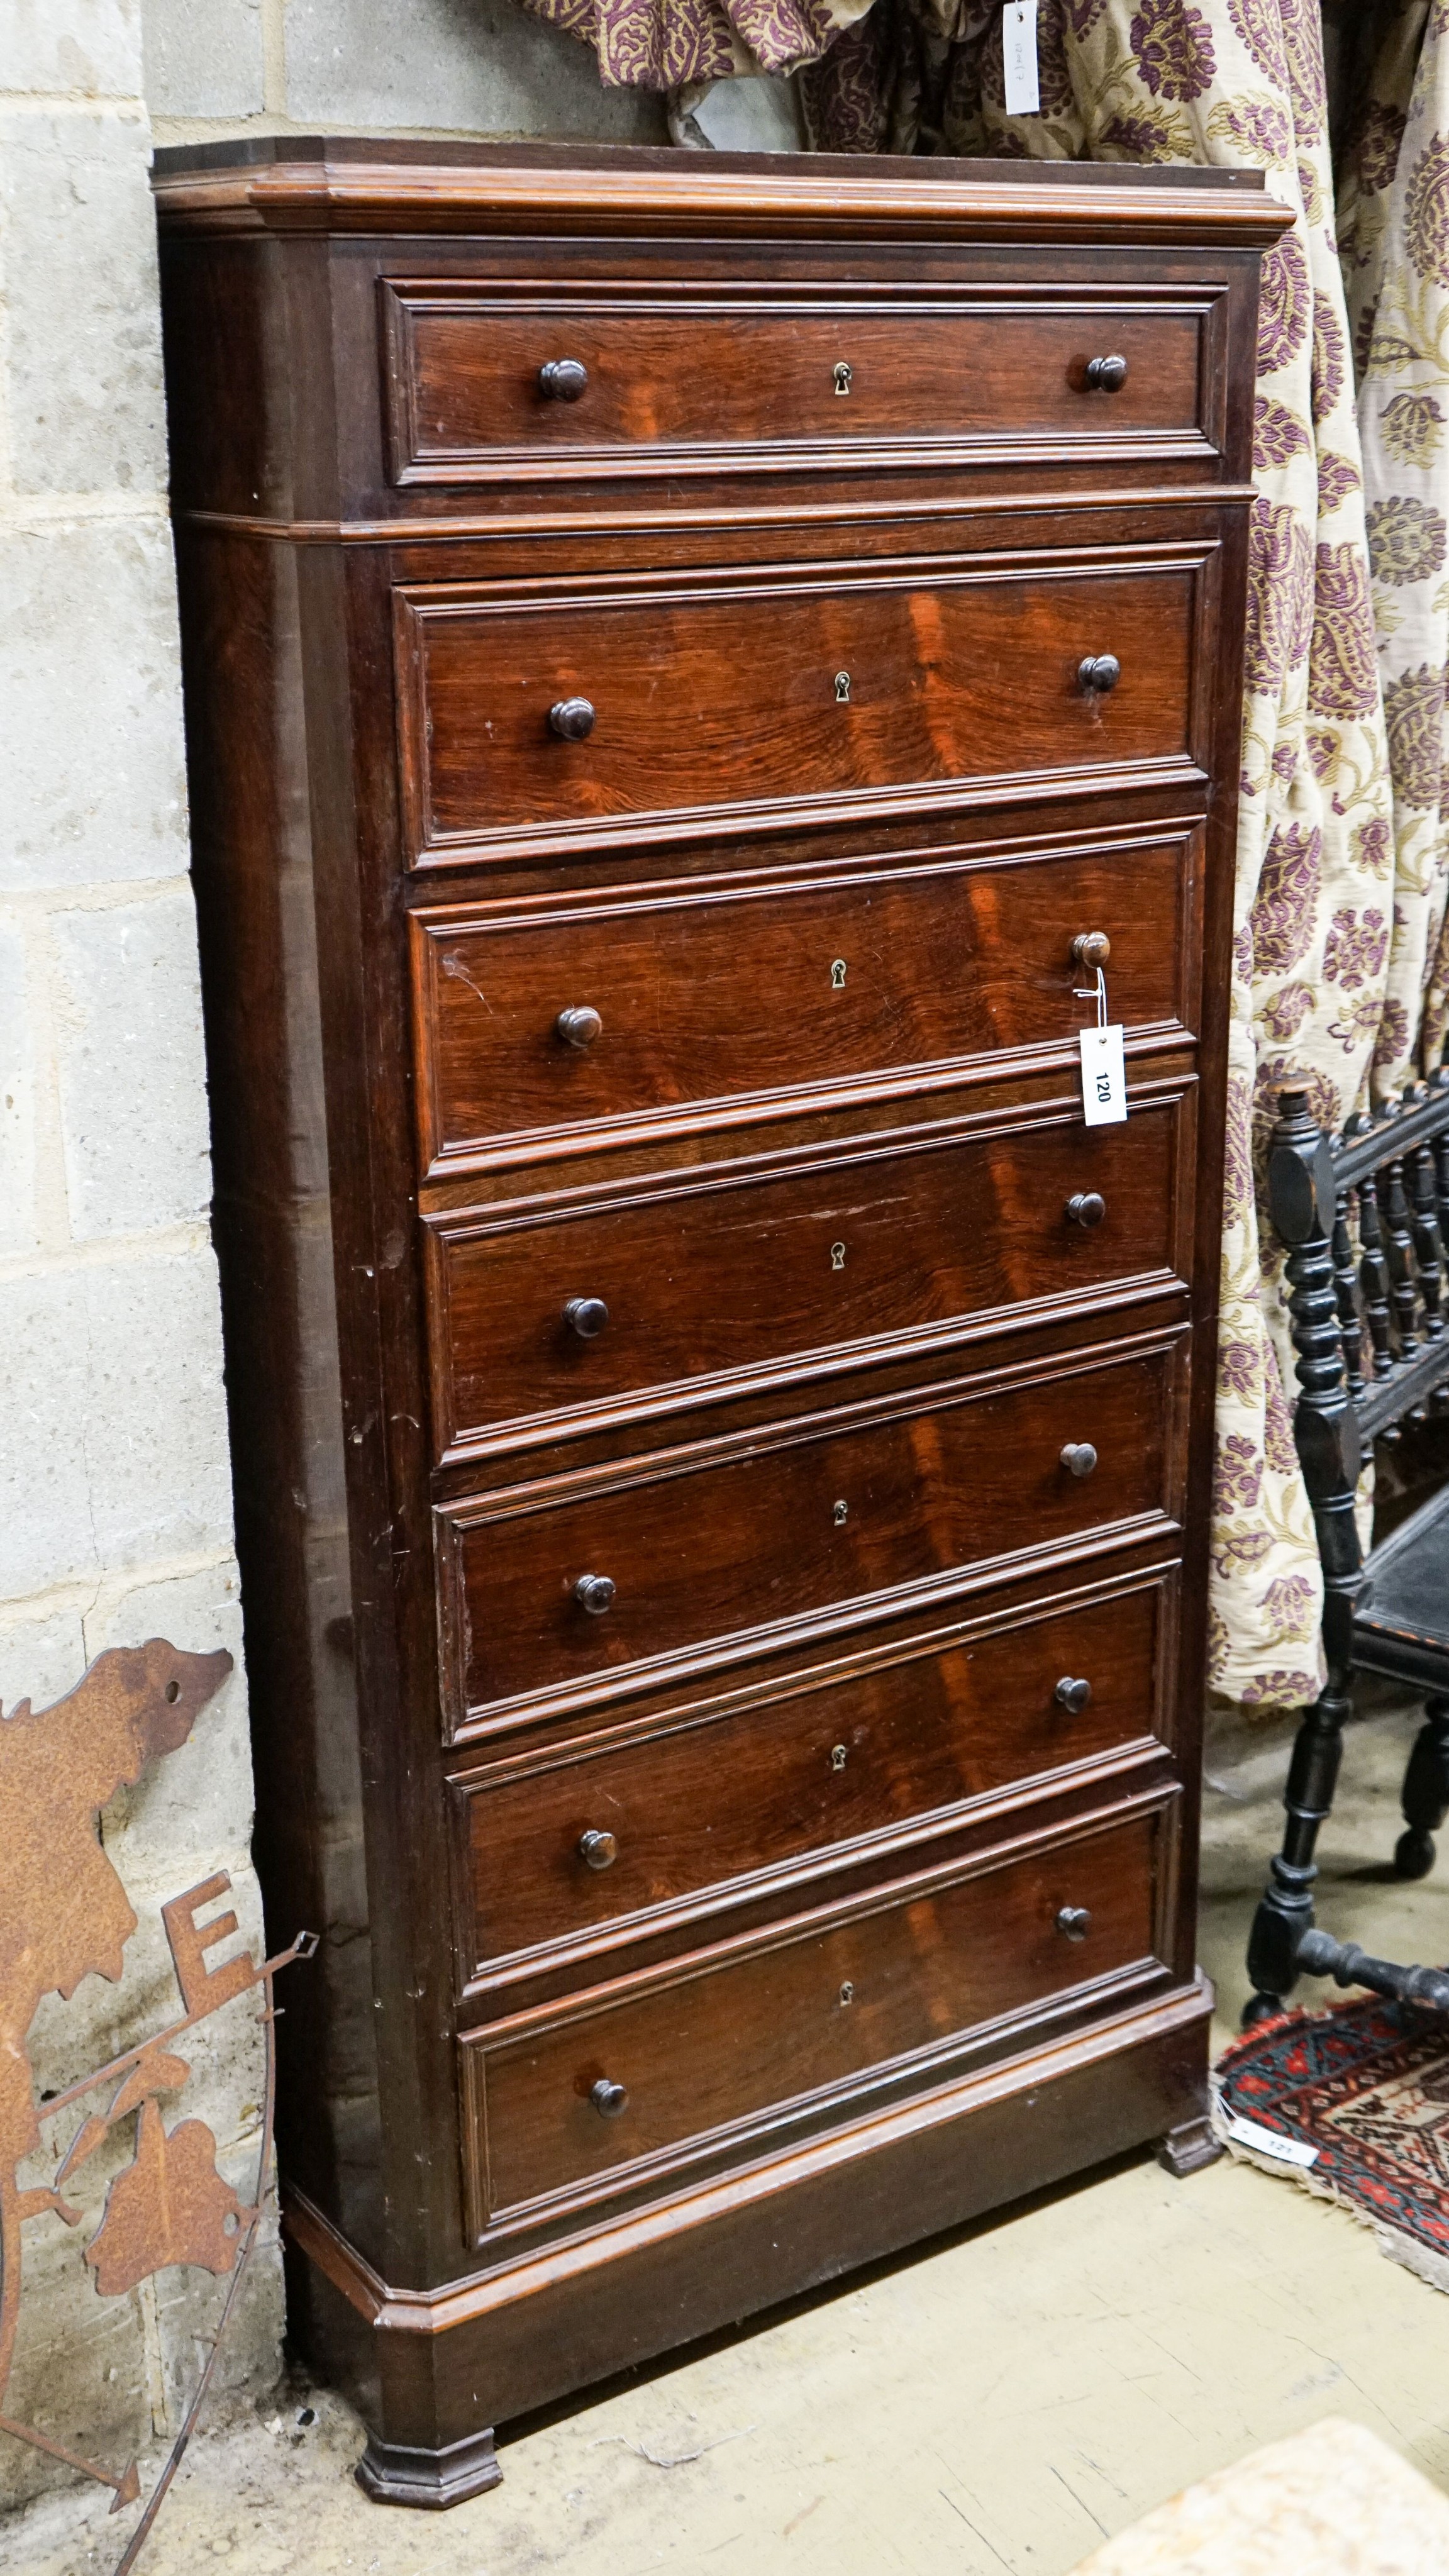 A 19th century French rosewood tall secretaire chest, width 80cm, depth 44cm, height 156cm                                                                                                                                  